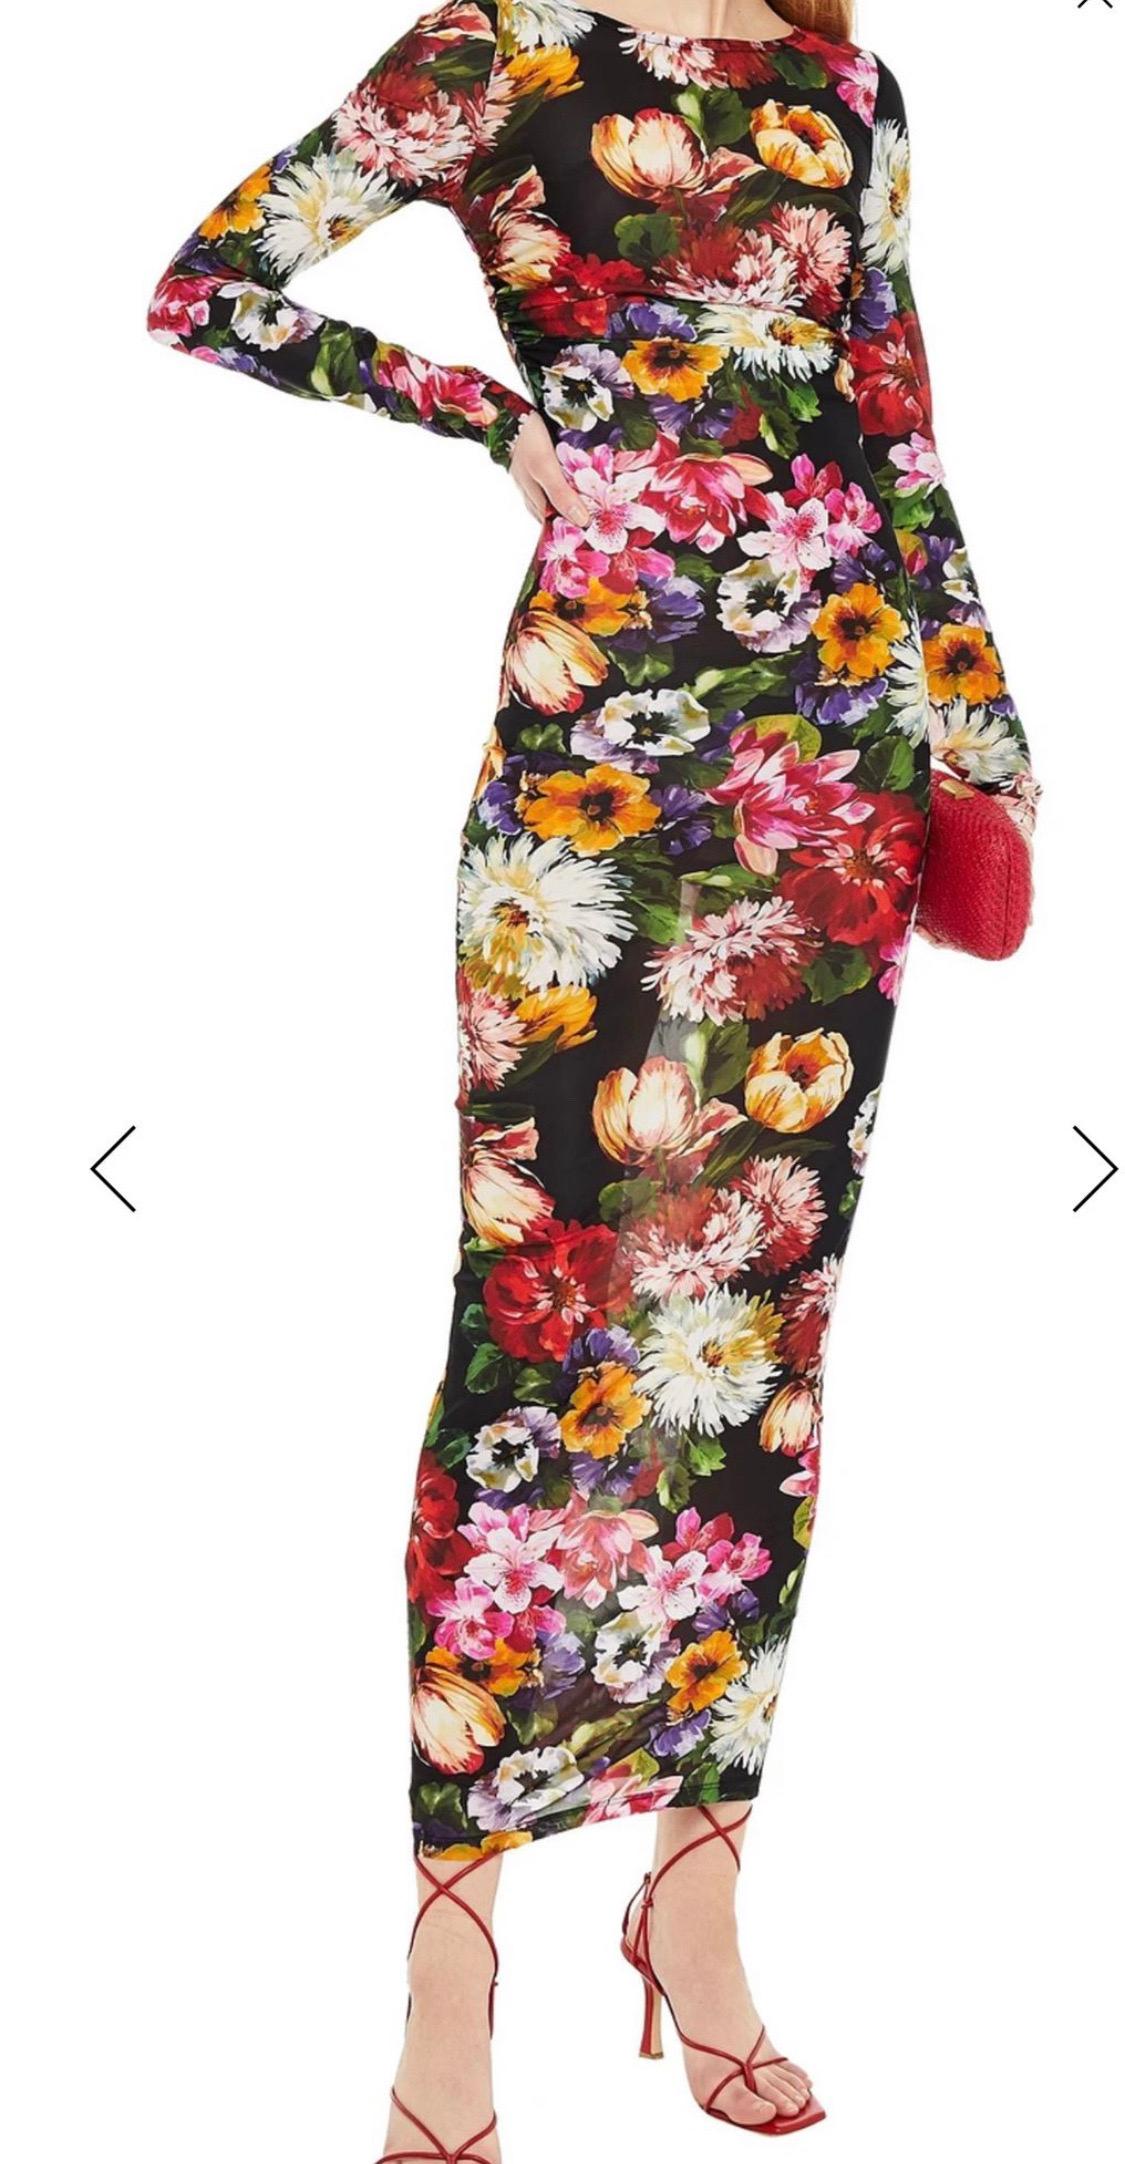 Gorgeous brand new with tags,
100% Authentic Dolce & Gabbana
Colorful sheer dress. Decorated with a
printed floral motif features a round
neck and long sleeves.

Model: Maxi dress

Color: Black with multicolor floral print
Zipper closure on the